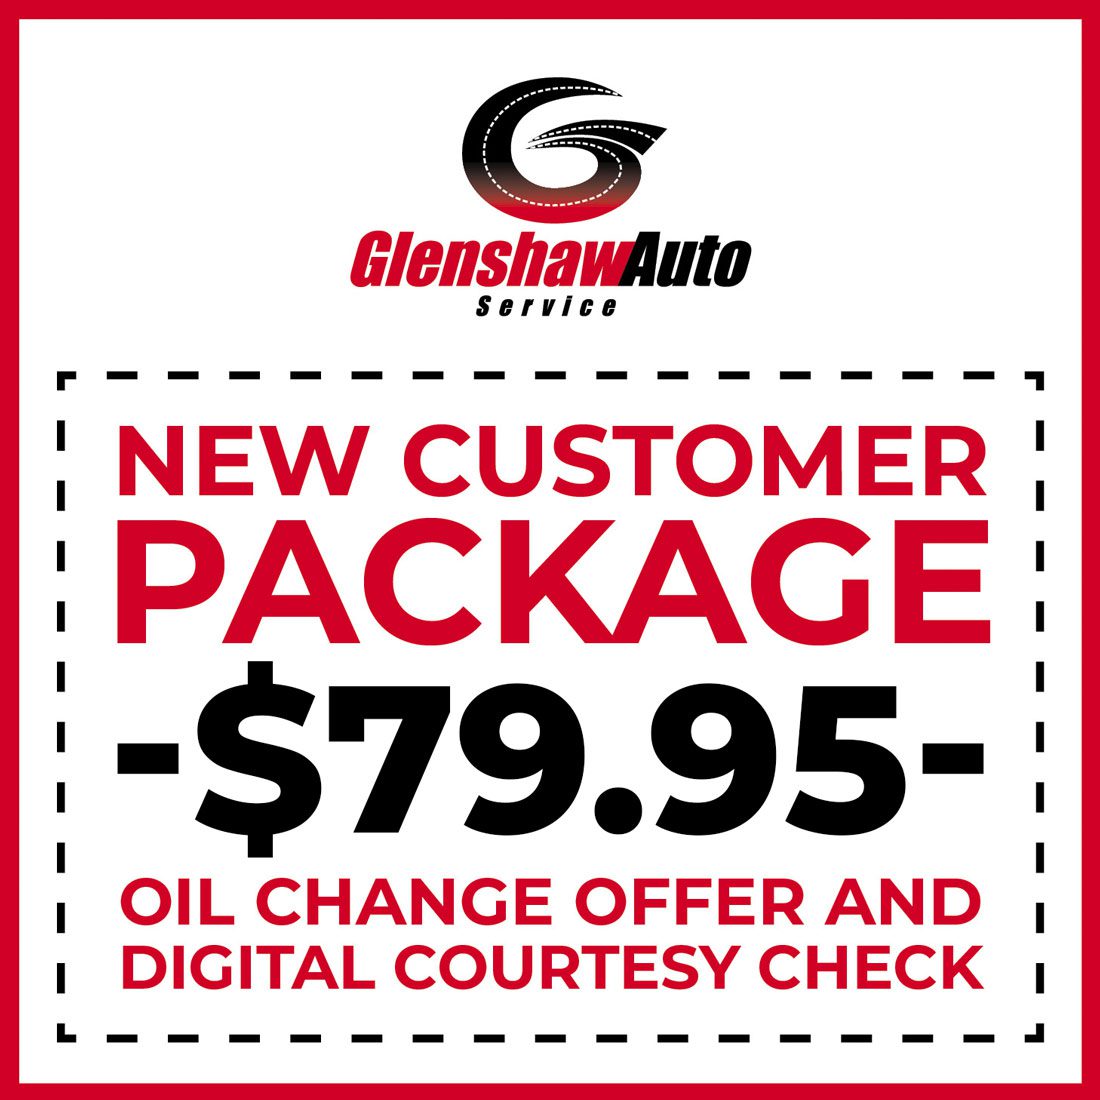 New Customer Package for $79.95